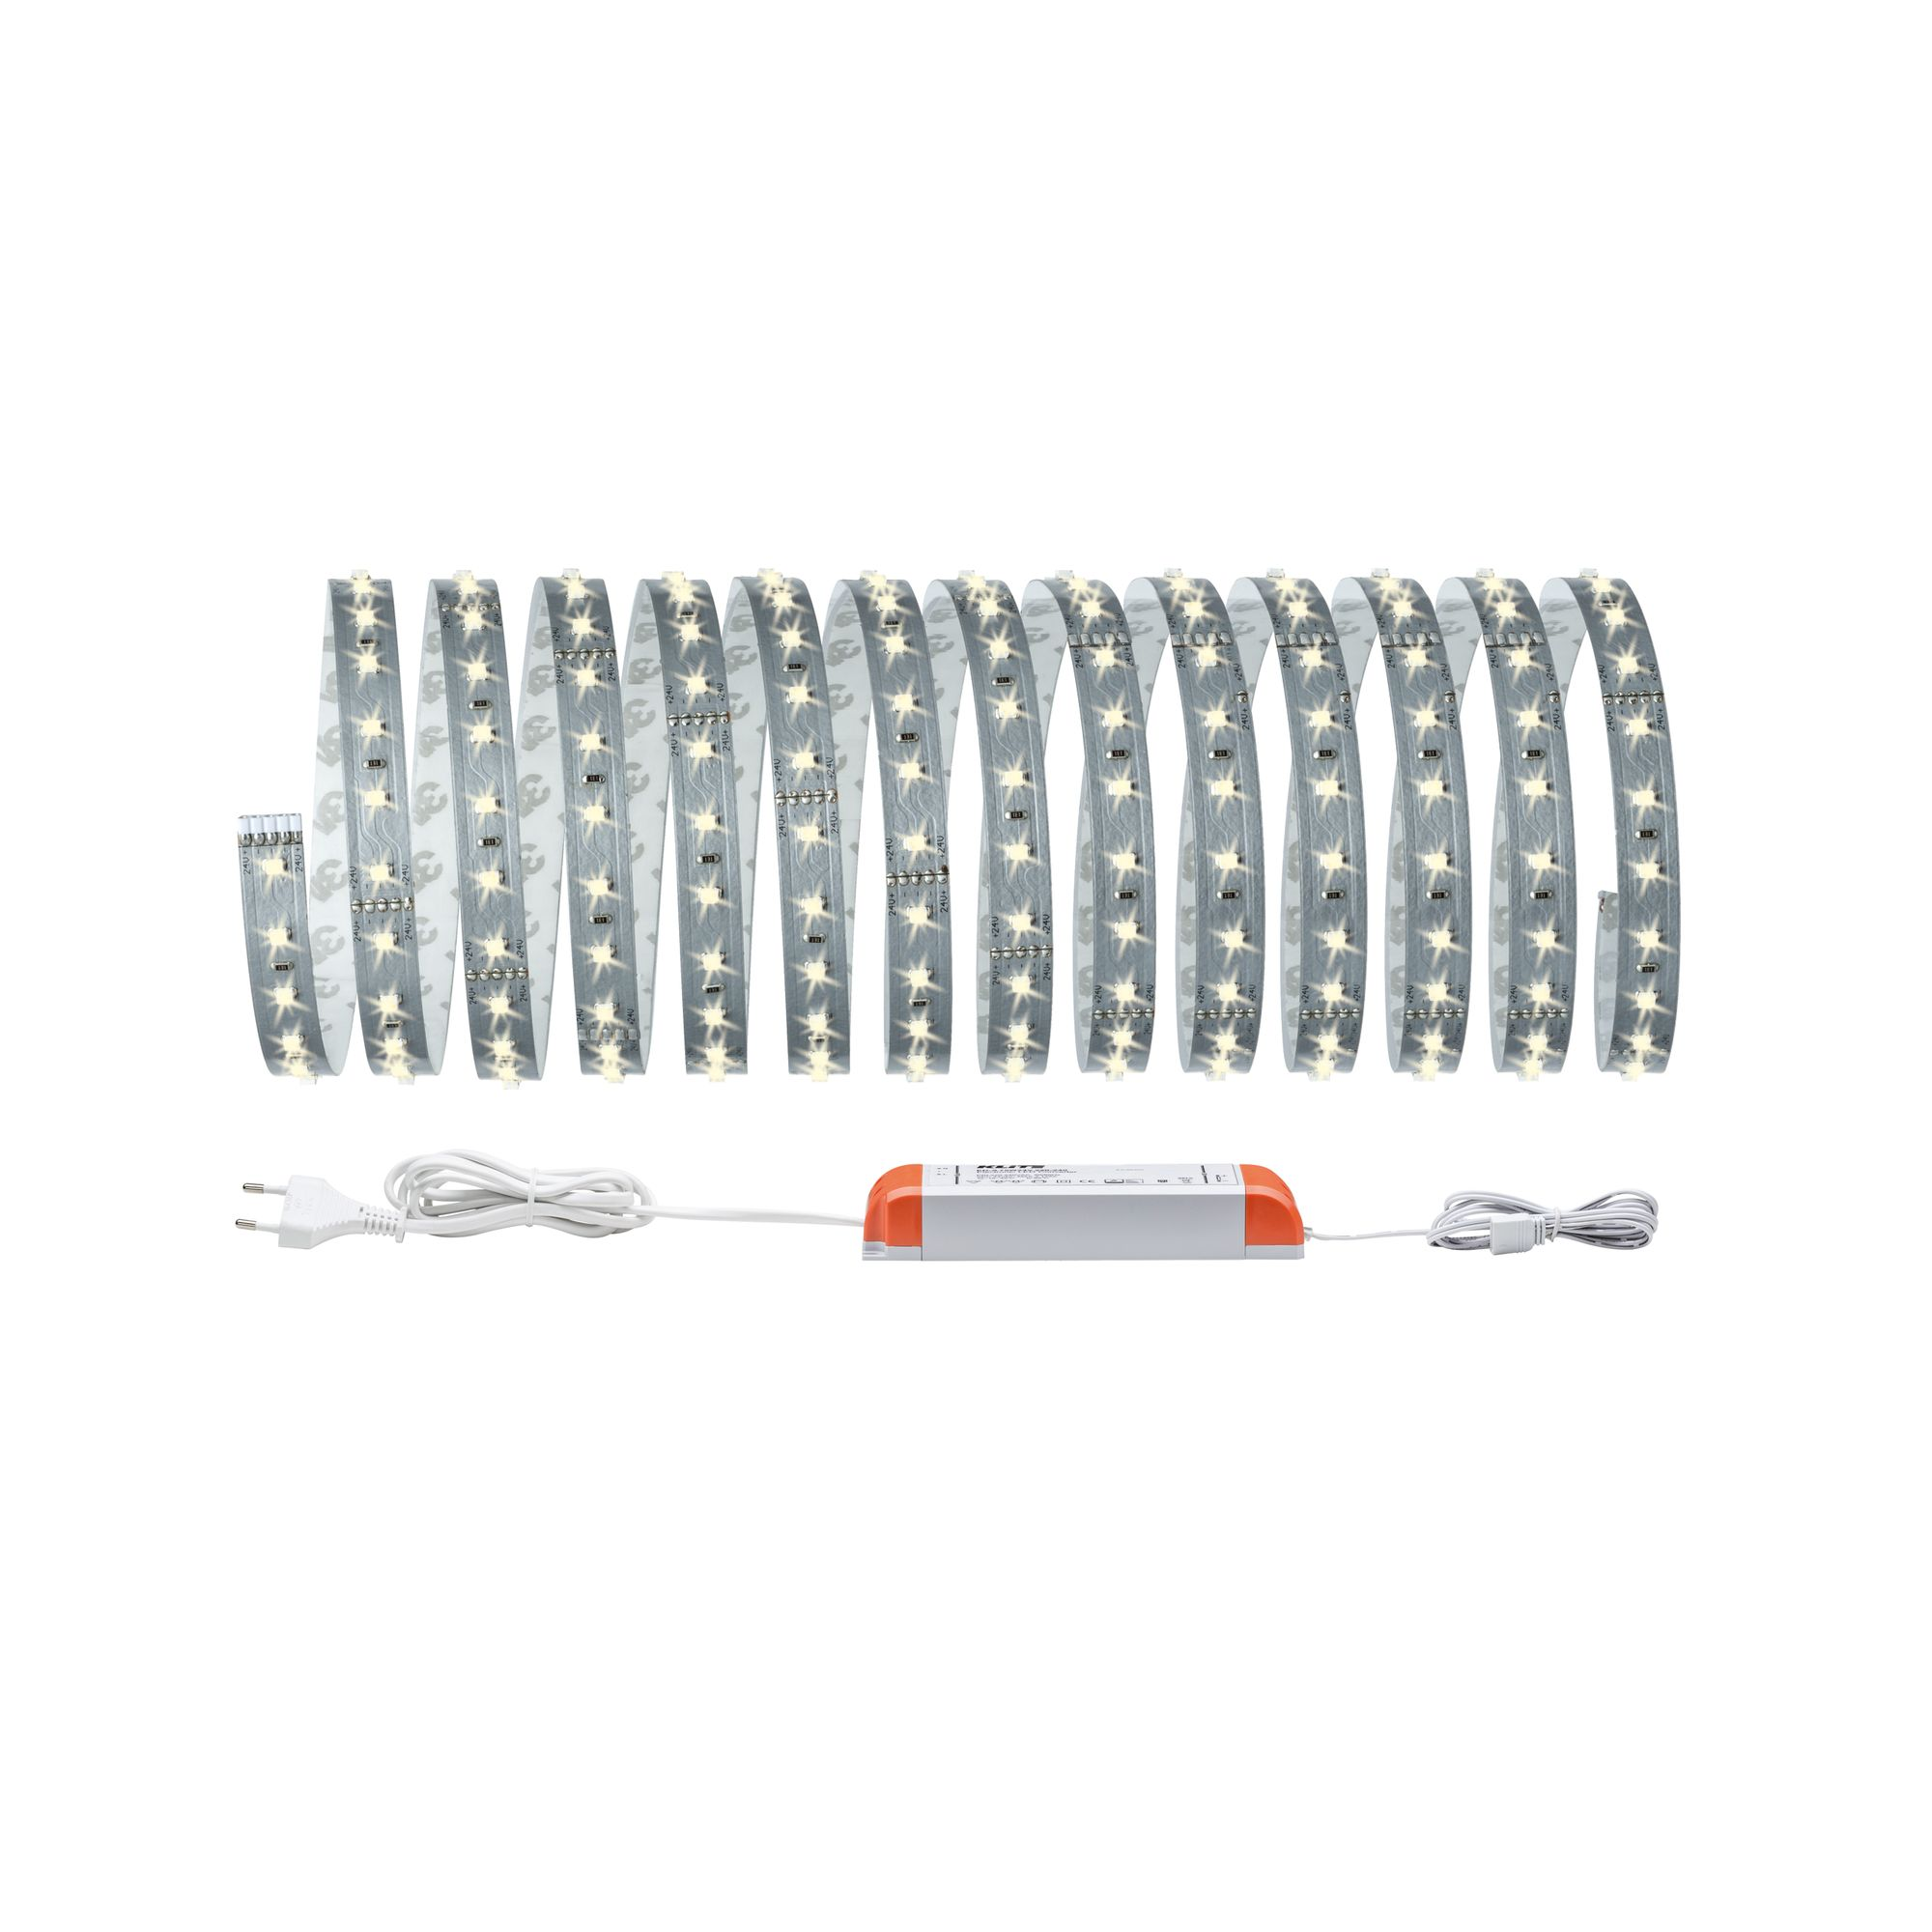 LED-Basisset 'MaxLED' 5 m 30 W 2750 lm warmweiß, silber + product picture